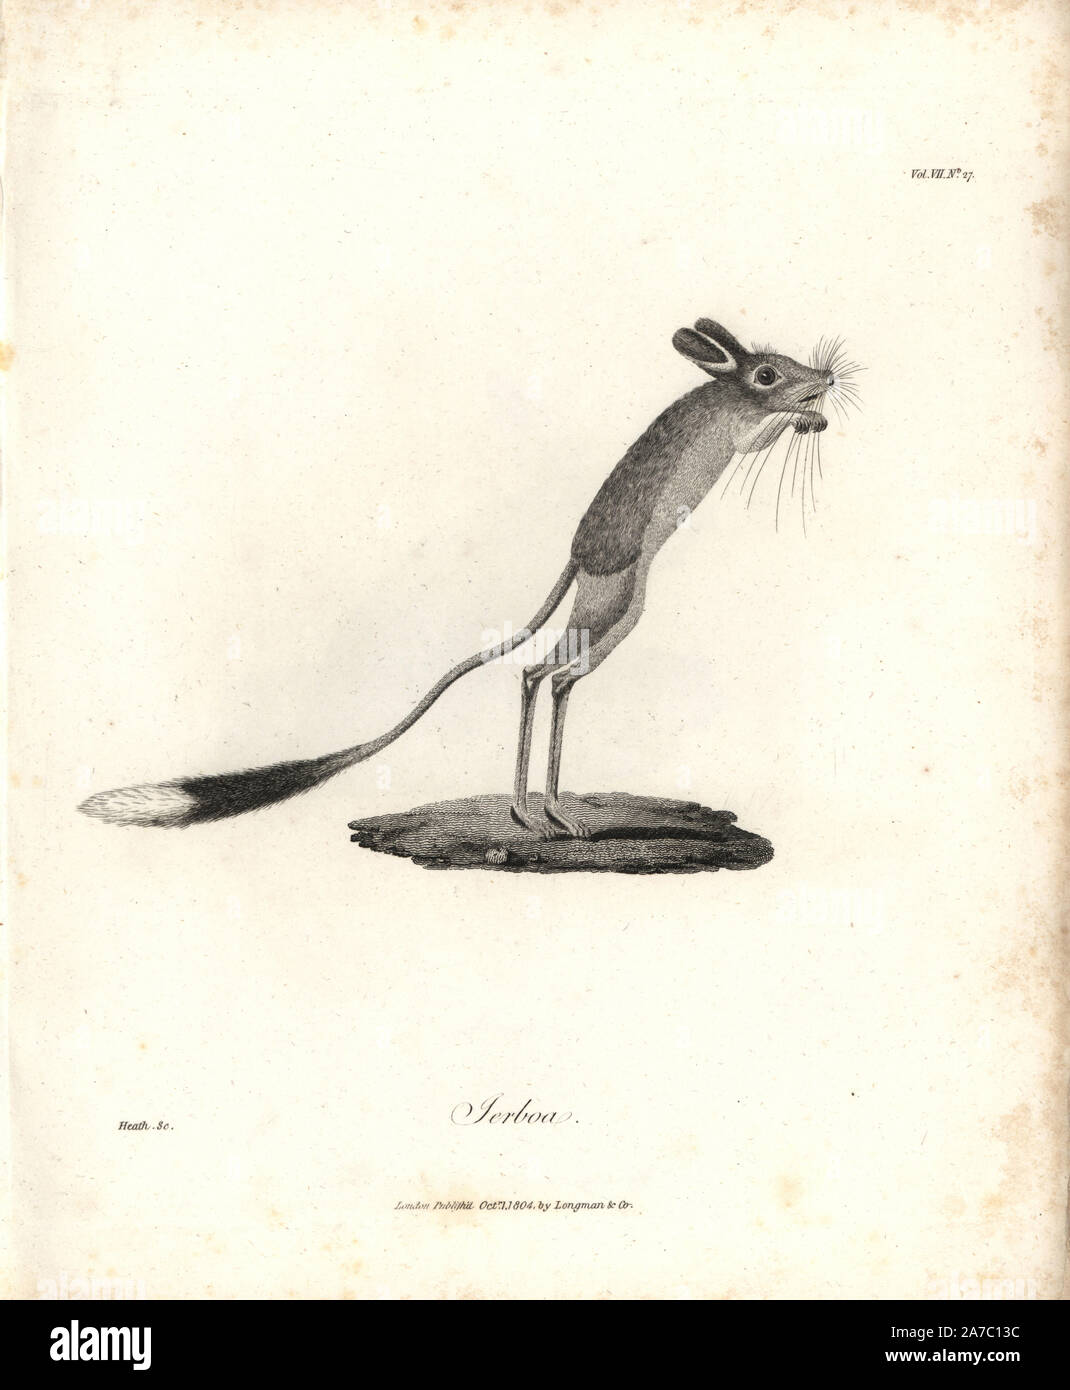 Lesser Egyptian jerboa, Jaculus jaculus. Copperplate engraving from James Bruce's 'Travels to Discover the Source of the Nile, in the years 1768, 1769, 1770, 1771, 1772 and 1773,' London, 1790. James Bruce (1730-1794) was a Scottish explorer and travel writer who spent more than 12 years in North Africa and Ethiopia. Engraved by Heath after an original drawing by Bruce. Stock Photo